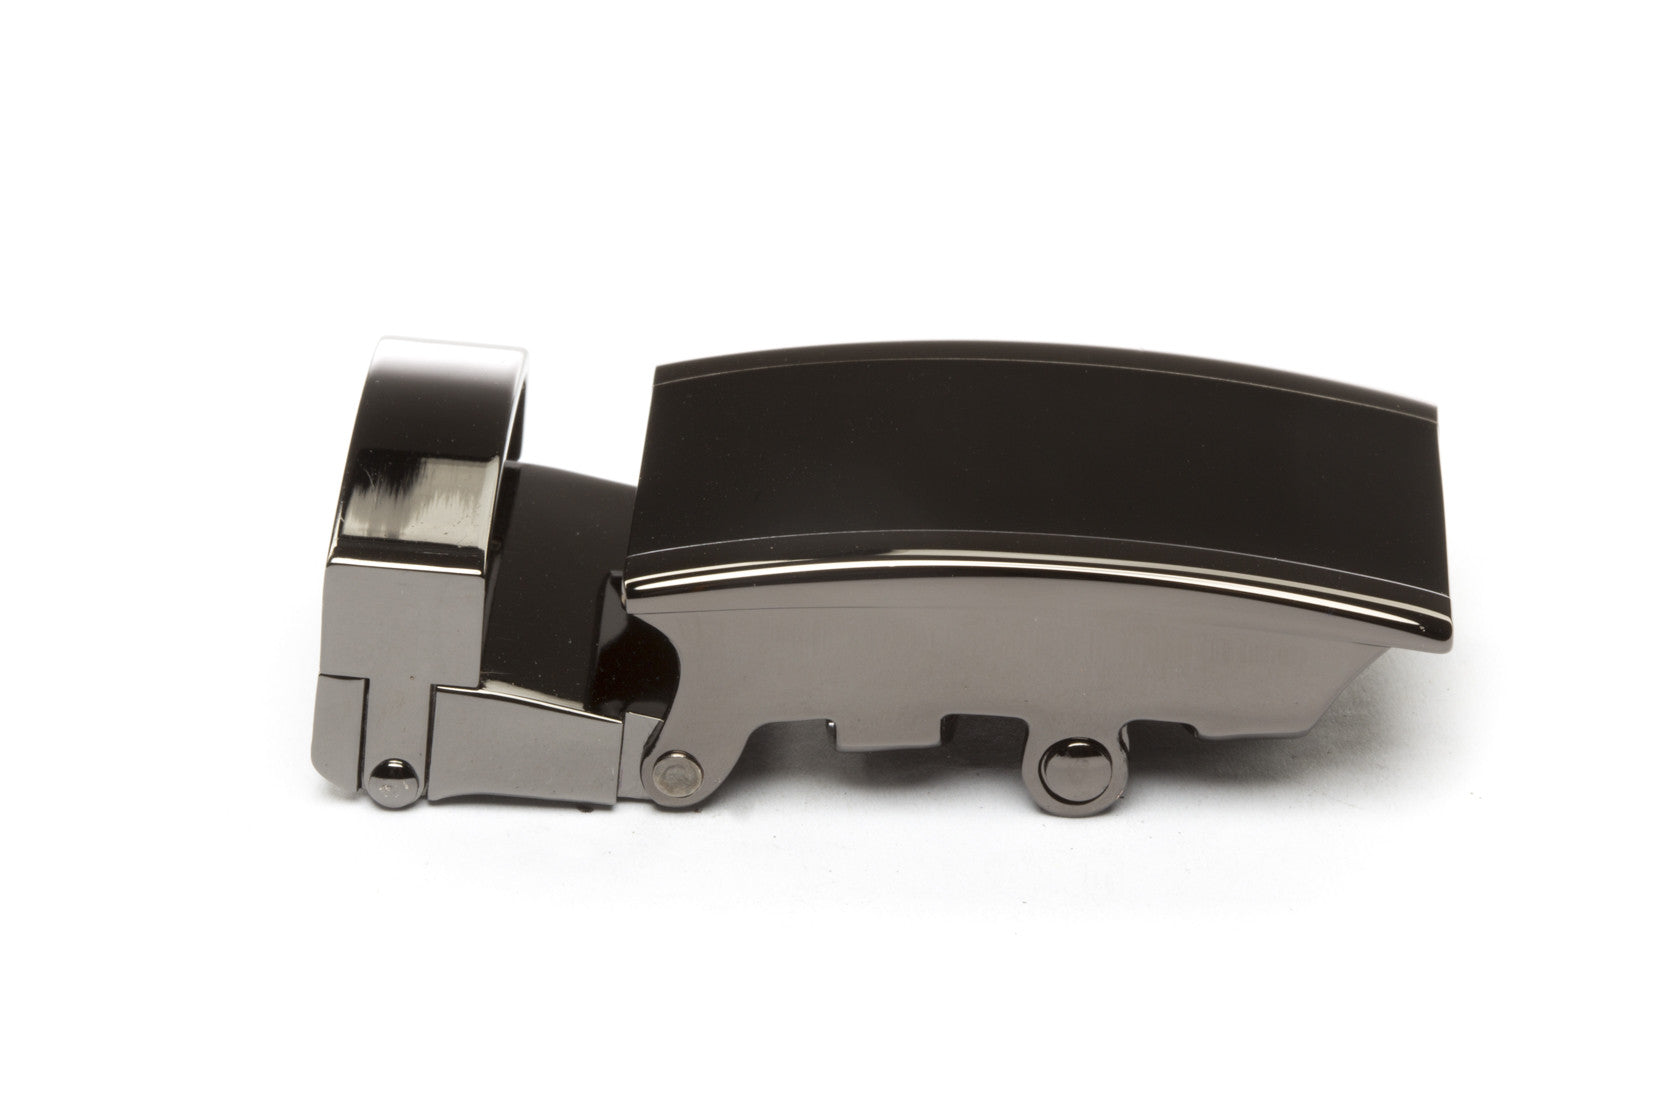 Men's onyx ratchet belt buckle in smoked gunmetal with a 1.25-inch width, right side view.